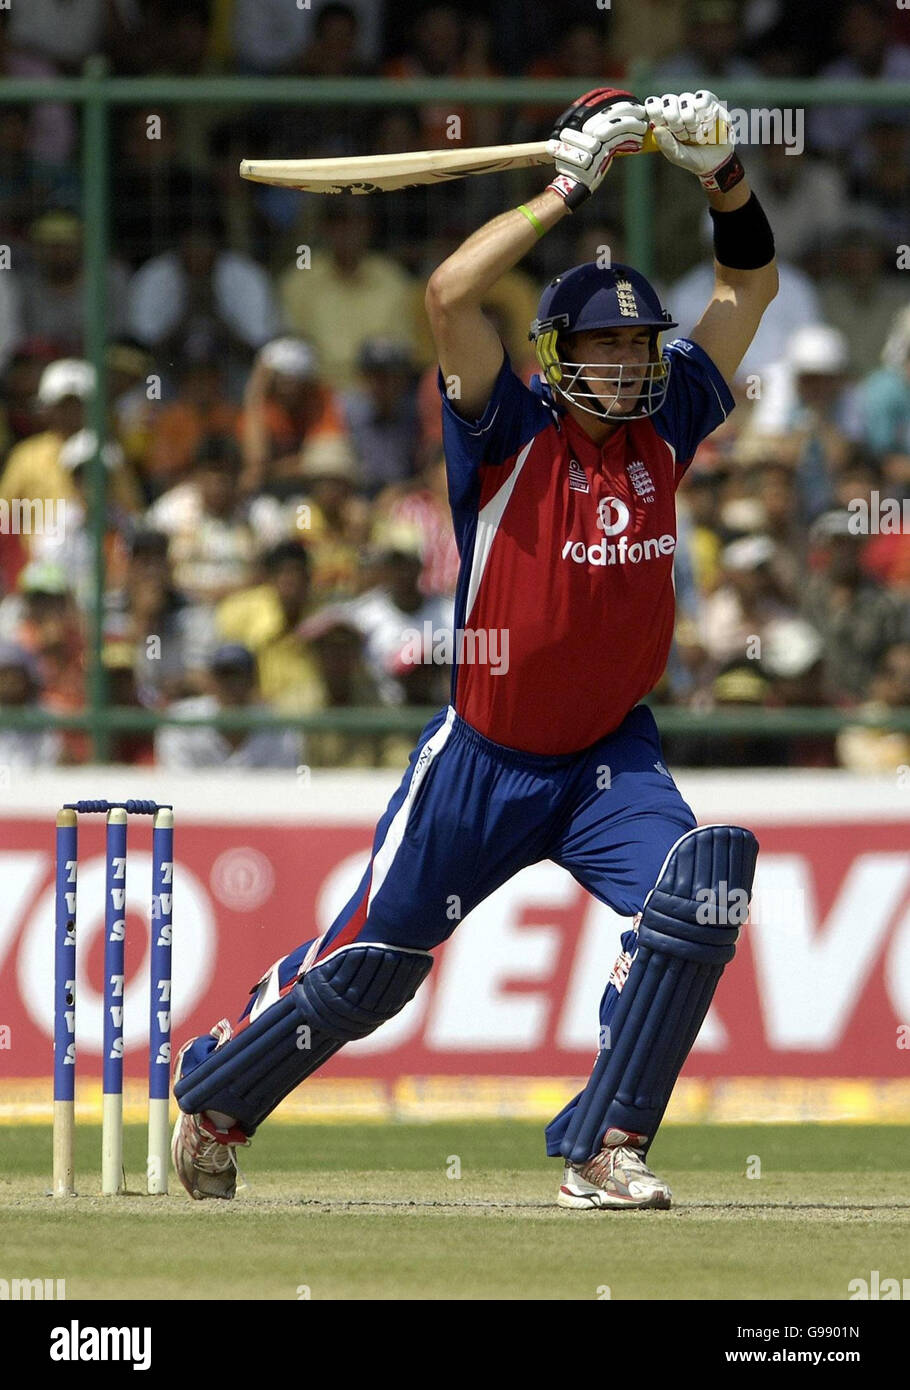 England batsman Kevin Pietersen avoids a ball during the first One Day International against India at the Ferozeshah Kotla Grounds, Delhi, India, Tuesday March 28, 2006. PRESS ASSOCIATION Photo. Photo credit should read: Rebecca Naden/PA. Stock Photo